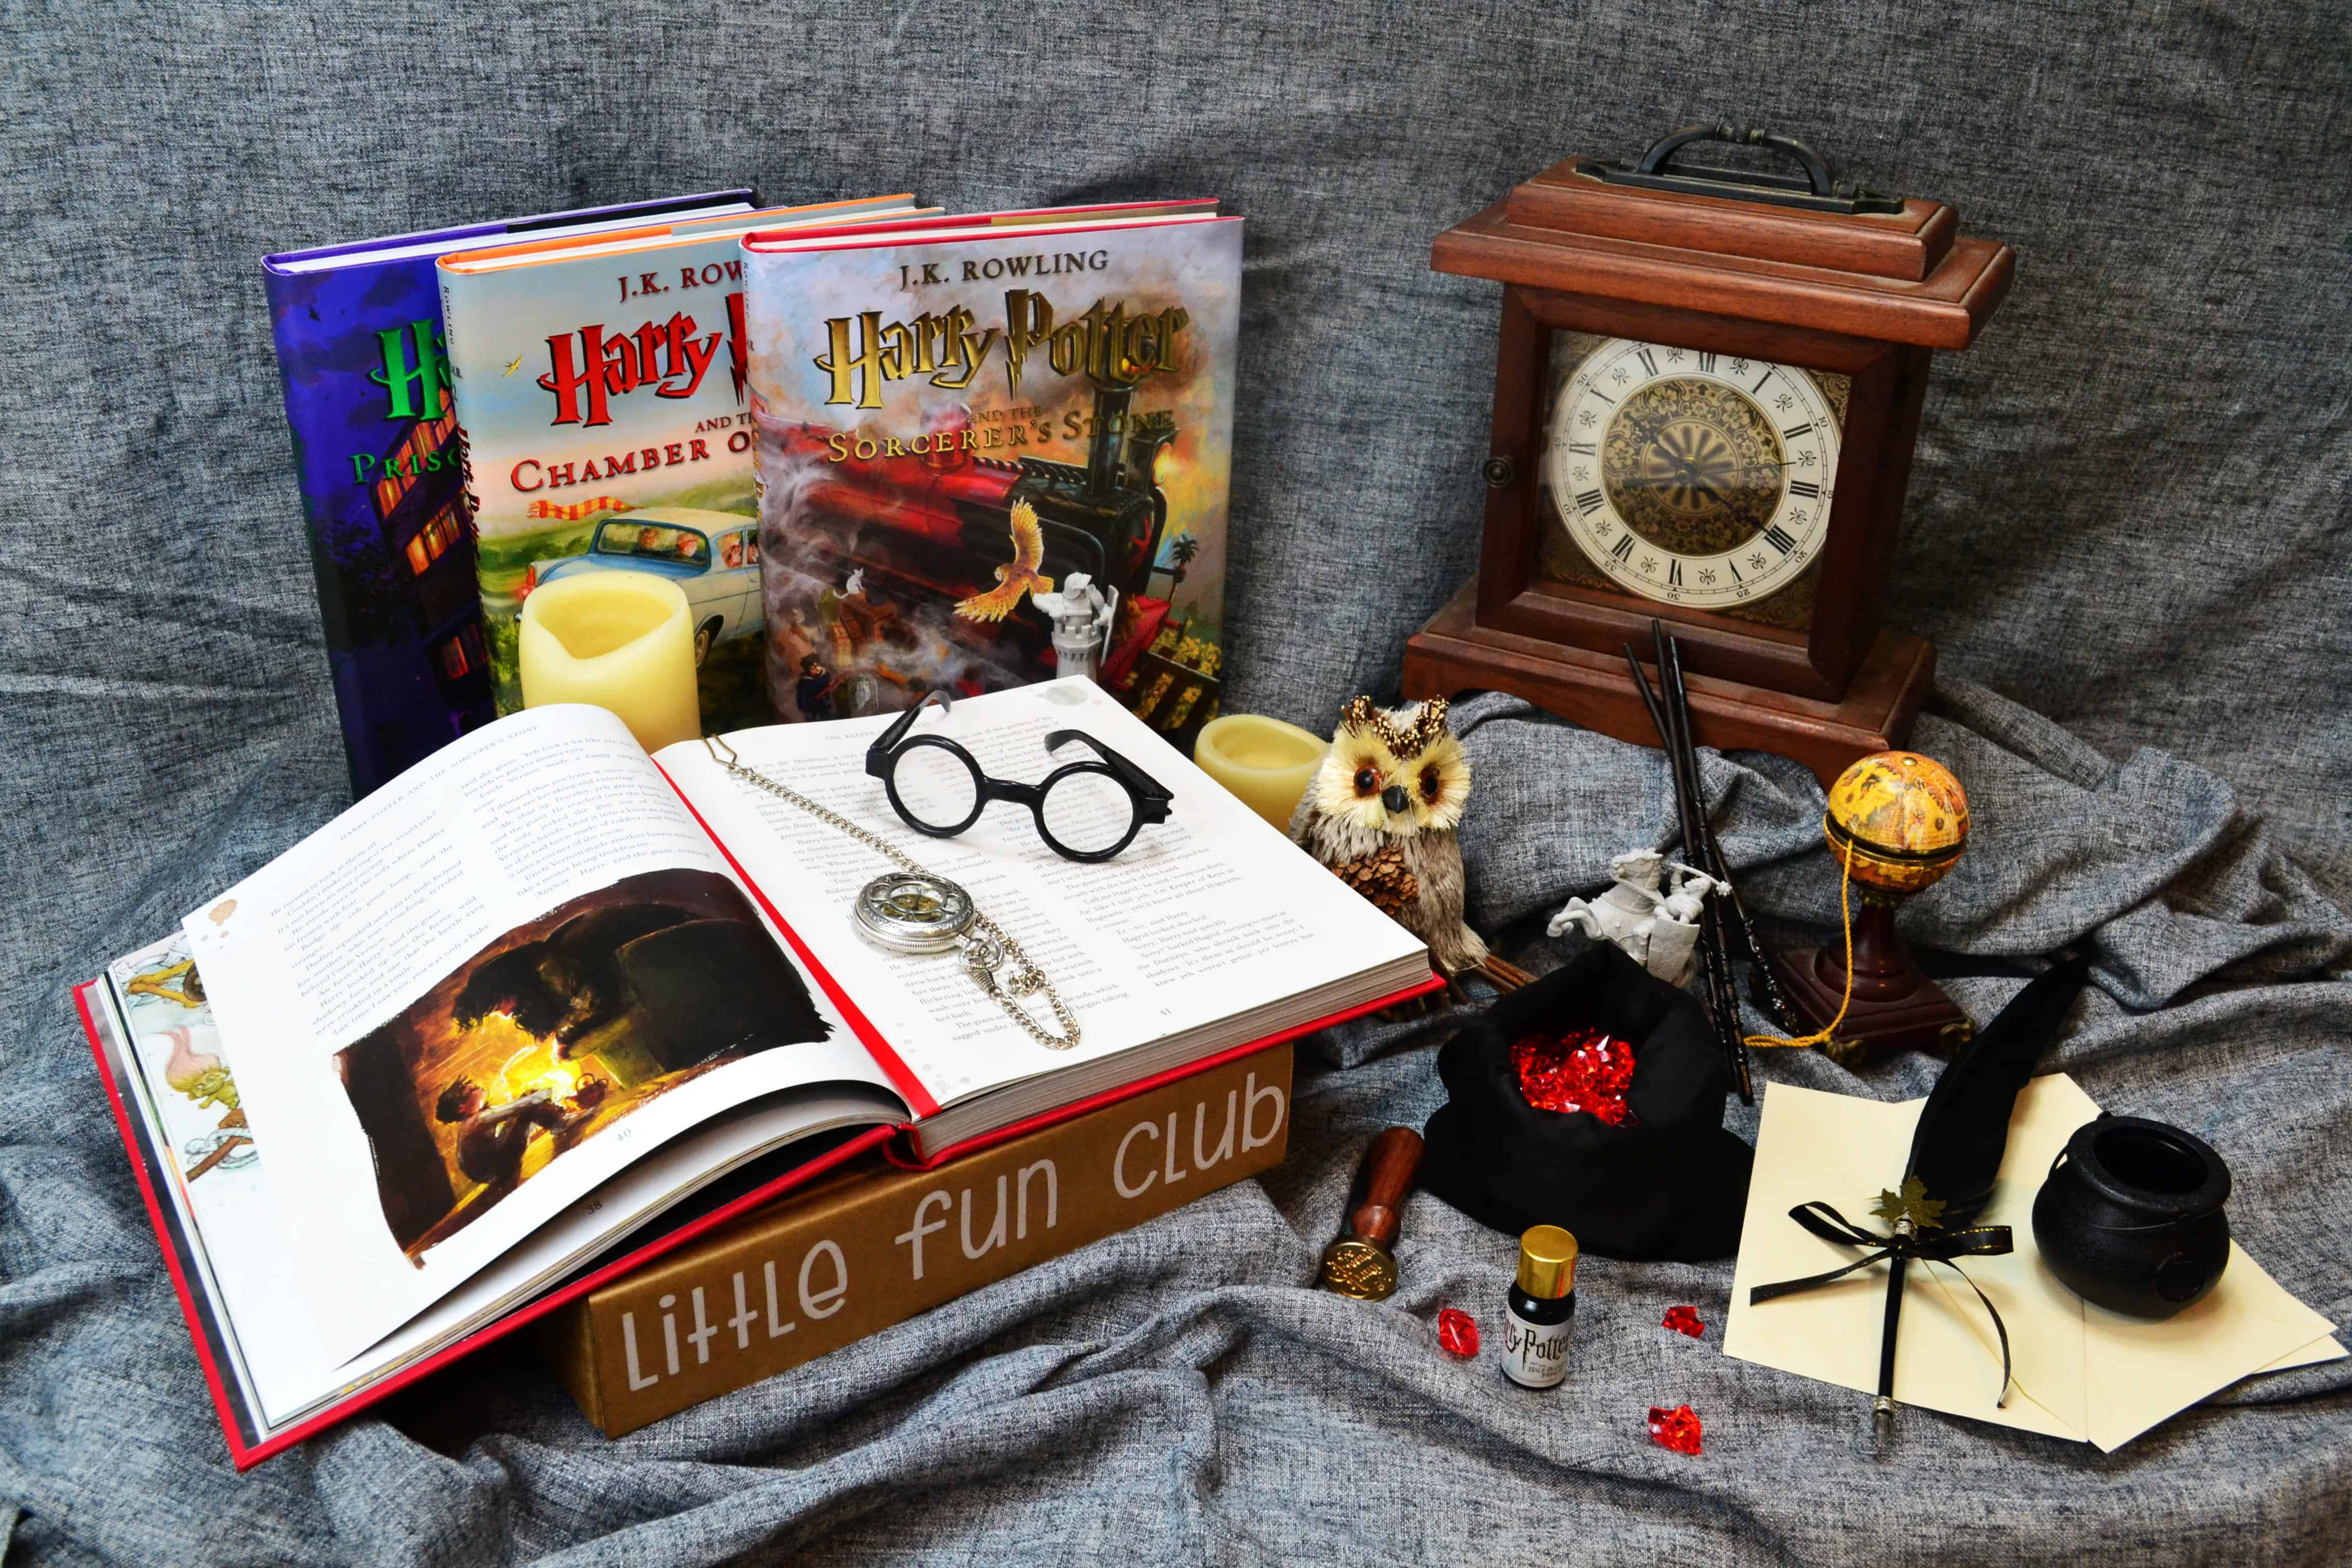 Harry Potter Box - include a book as well as items that go with the